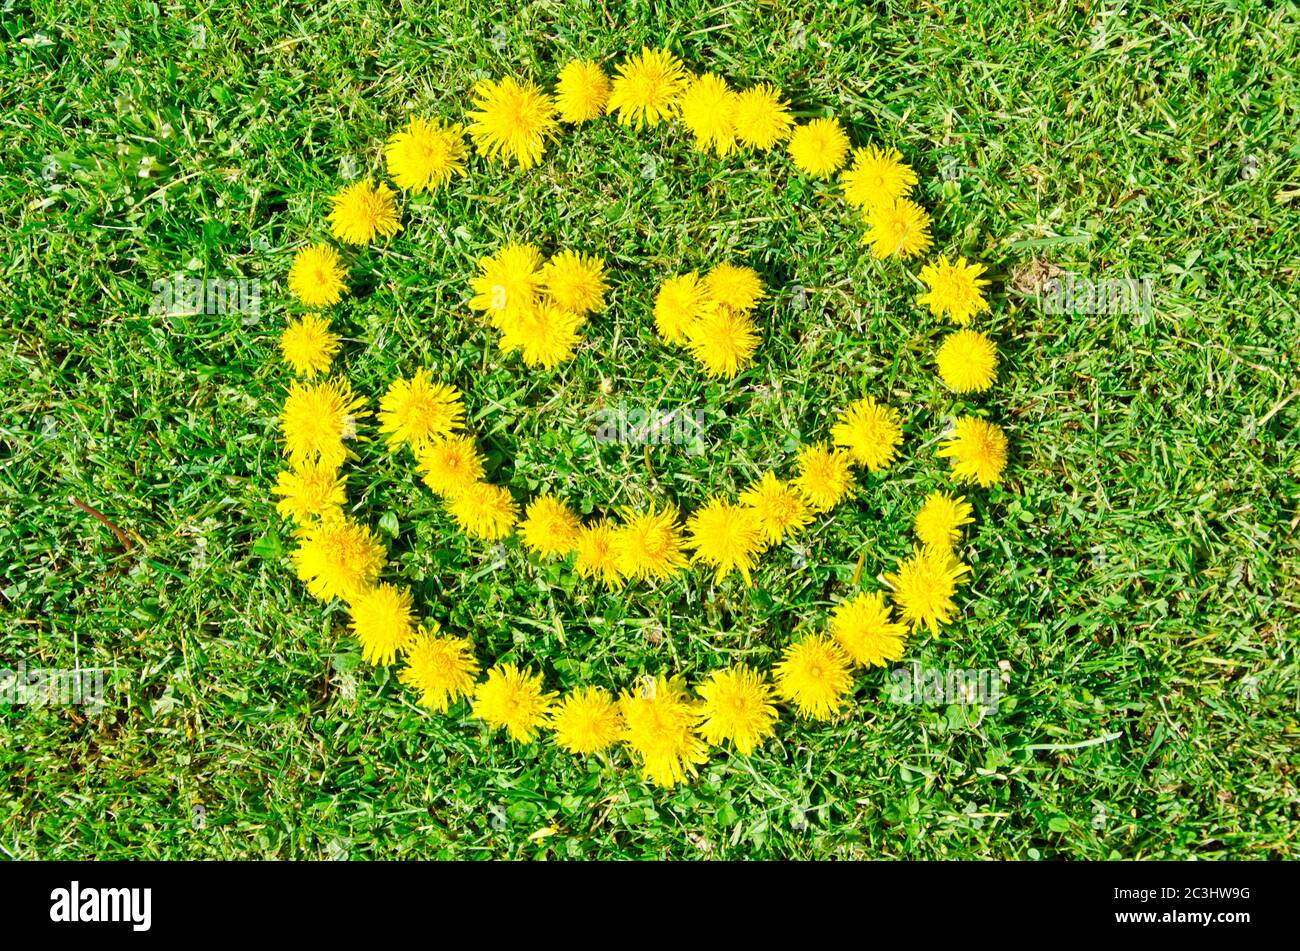 Smiling face made of dandelion flowers on grass meadow Stock Photo